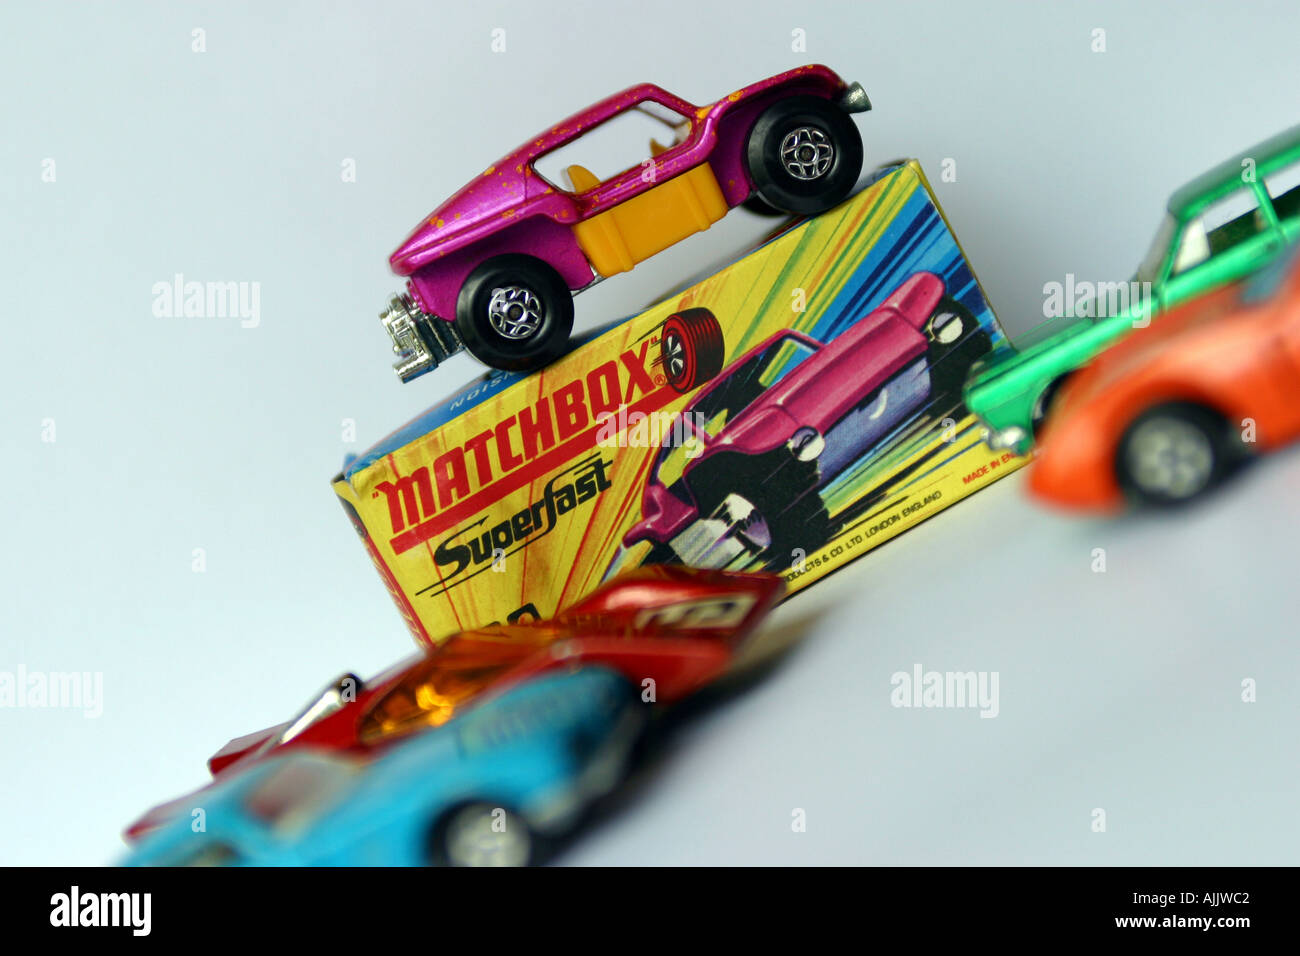 matchbox toy car with original packaging Stock Photo